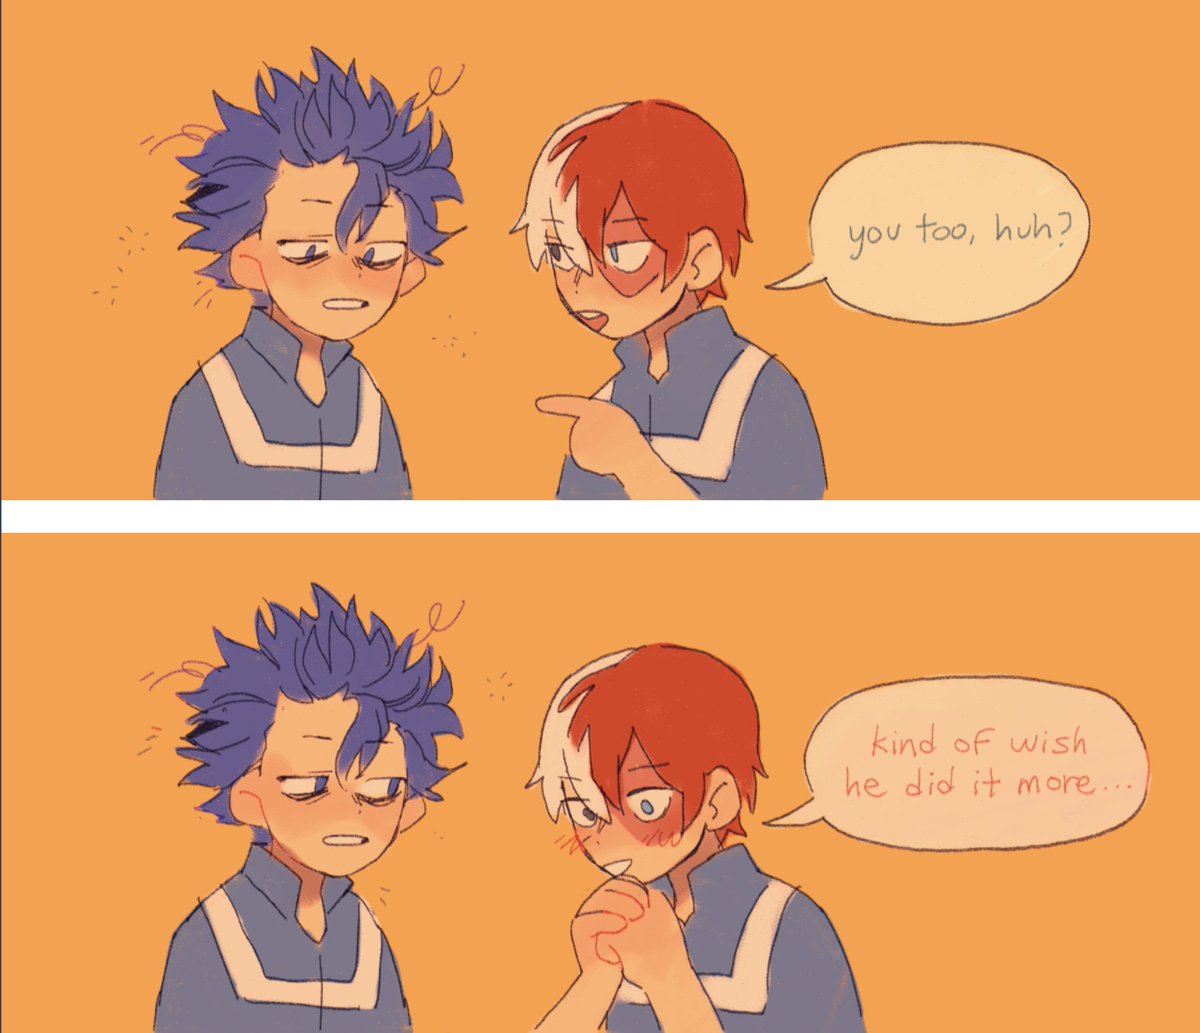 support group for shinsou and todoroki: absolutely wrecked by friendship/deku hugs #bnha 